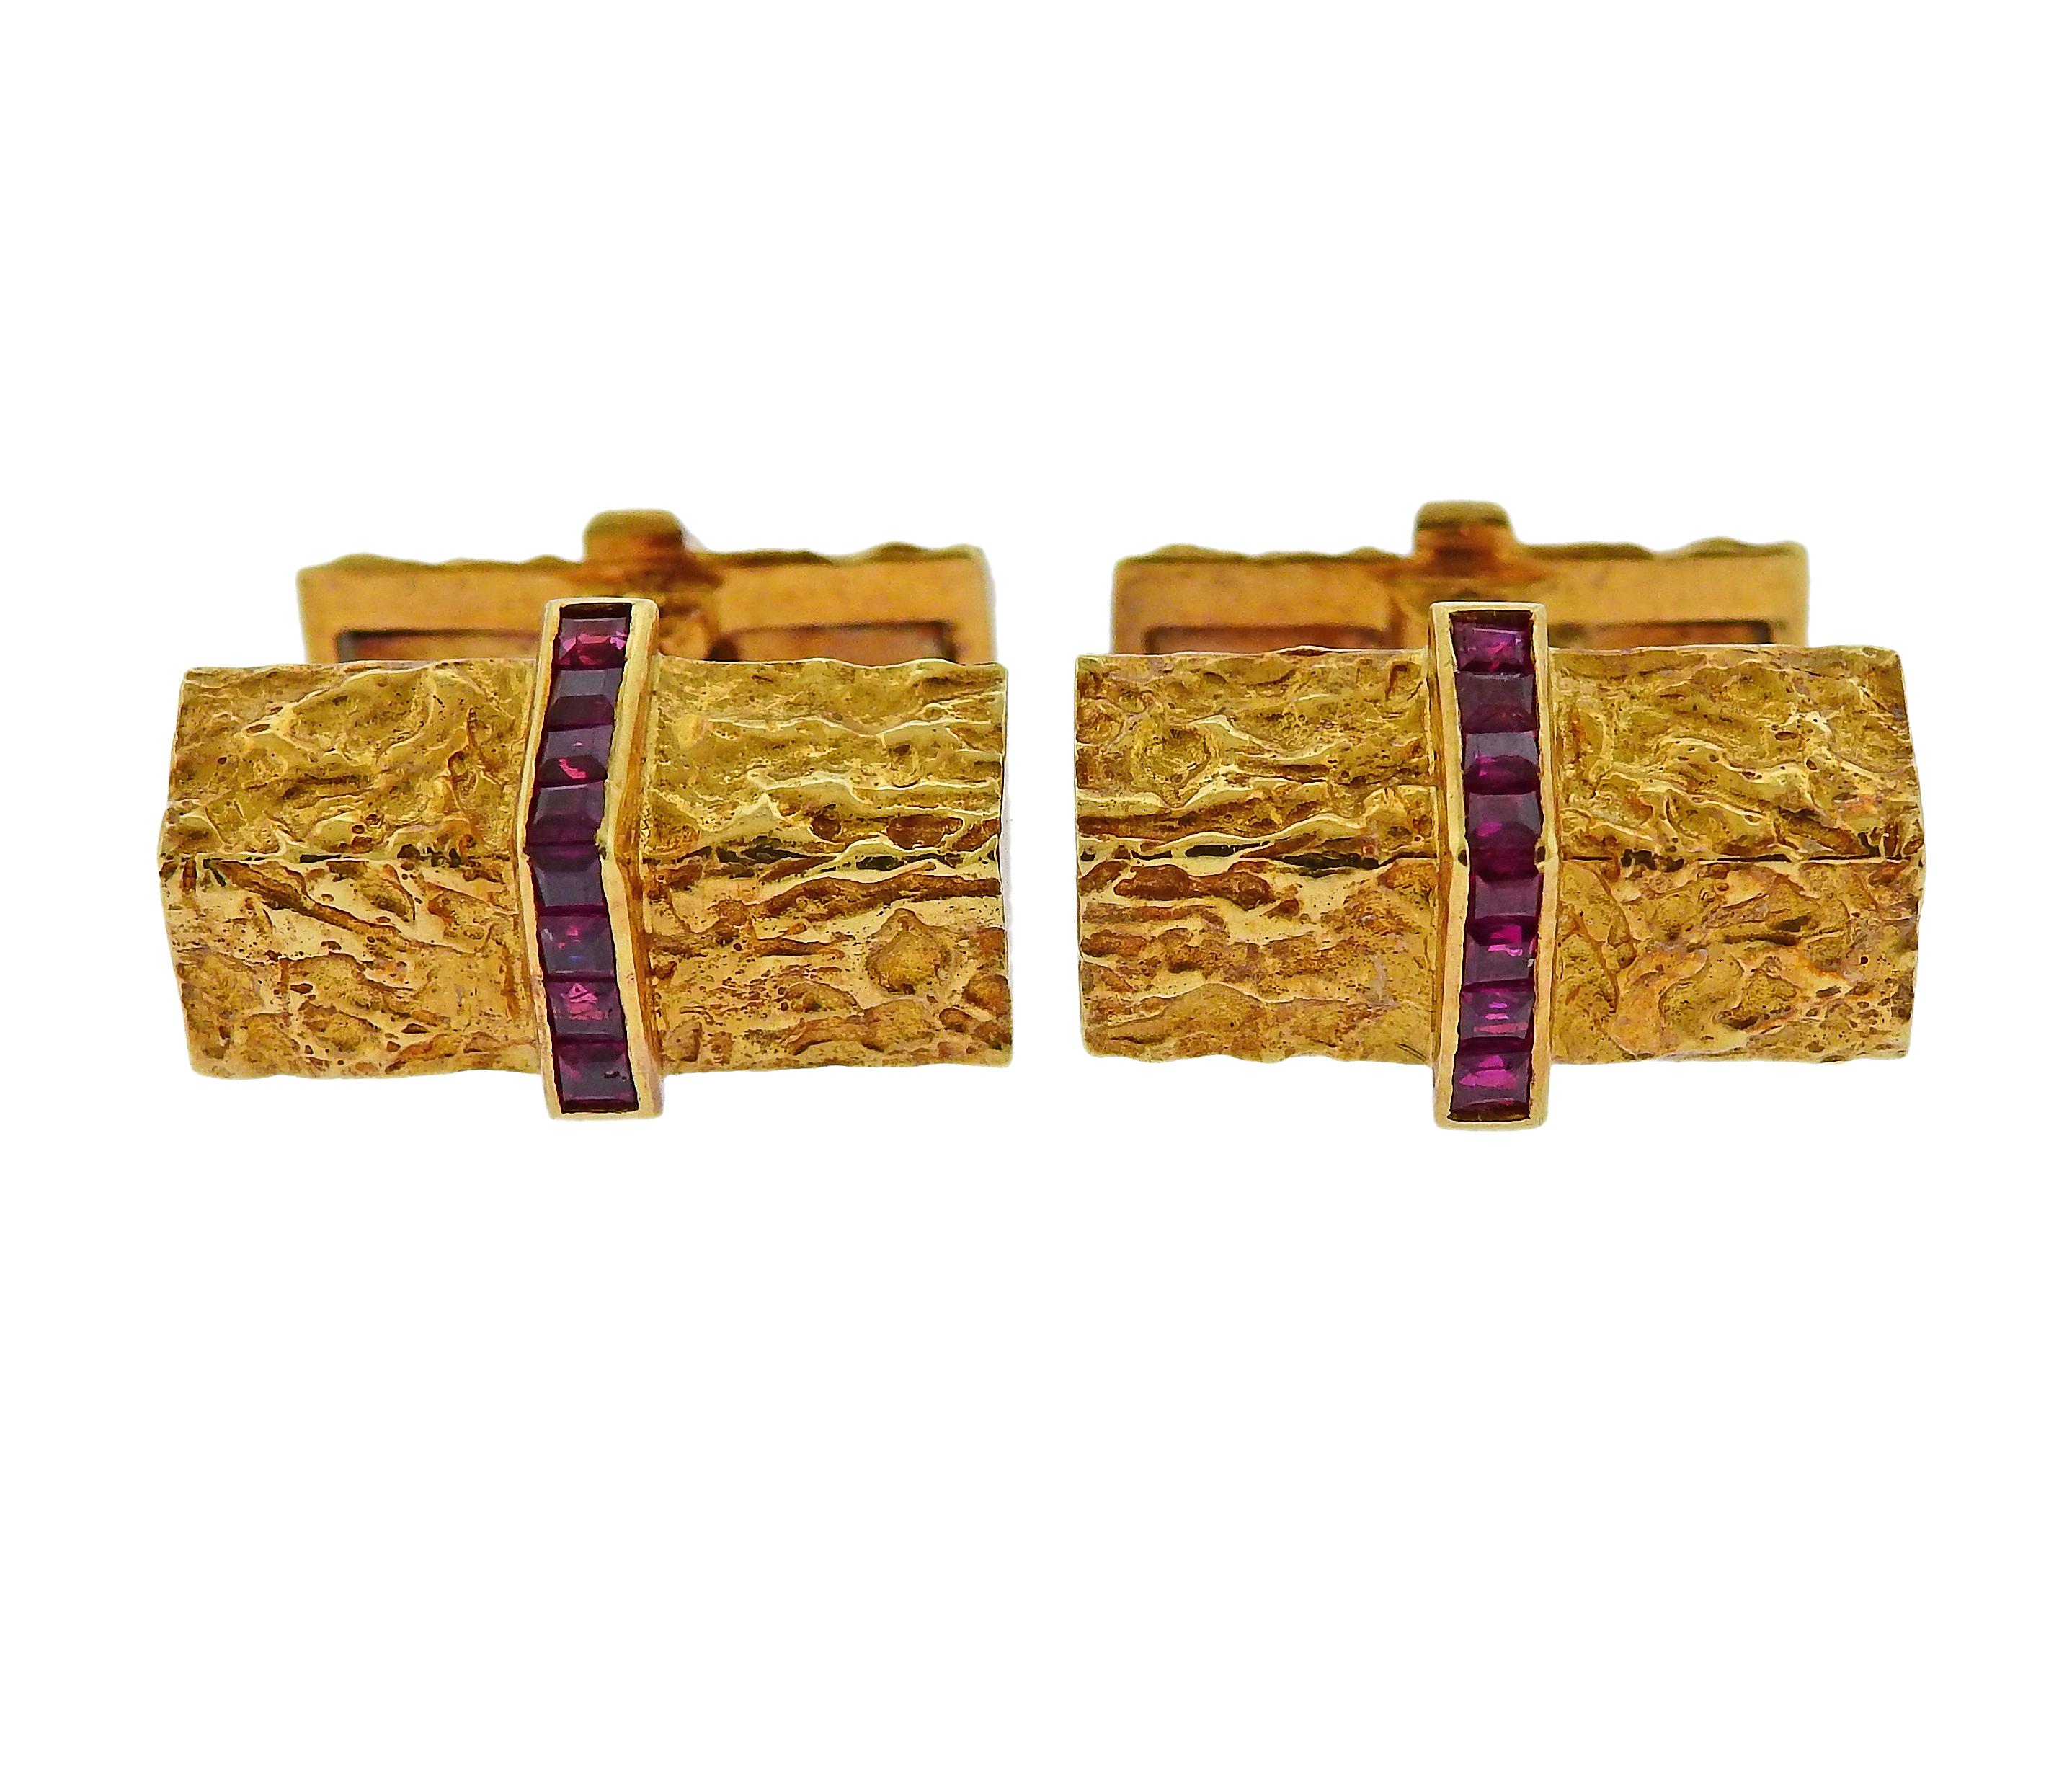 Classic 18k yellow gold cufflinks and studs set by Tiffany& Co, set with rubies. Cufflink top - 21mm x 13mm; back - 18mm x 10mm. Stud top - 12mm x 10mm. Total weight is 29.7 grams. Marked Tiffany & Co, 18k.